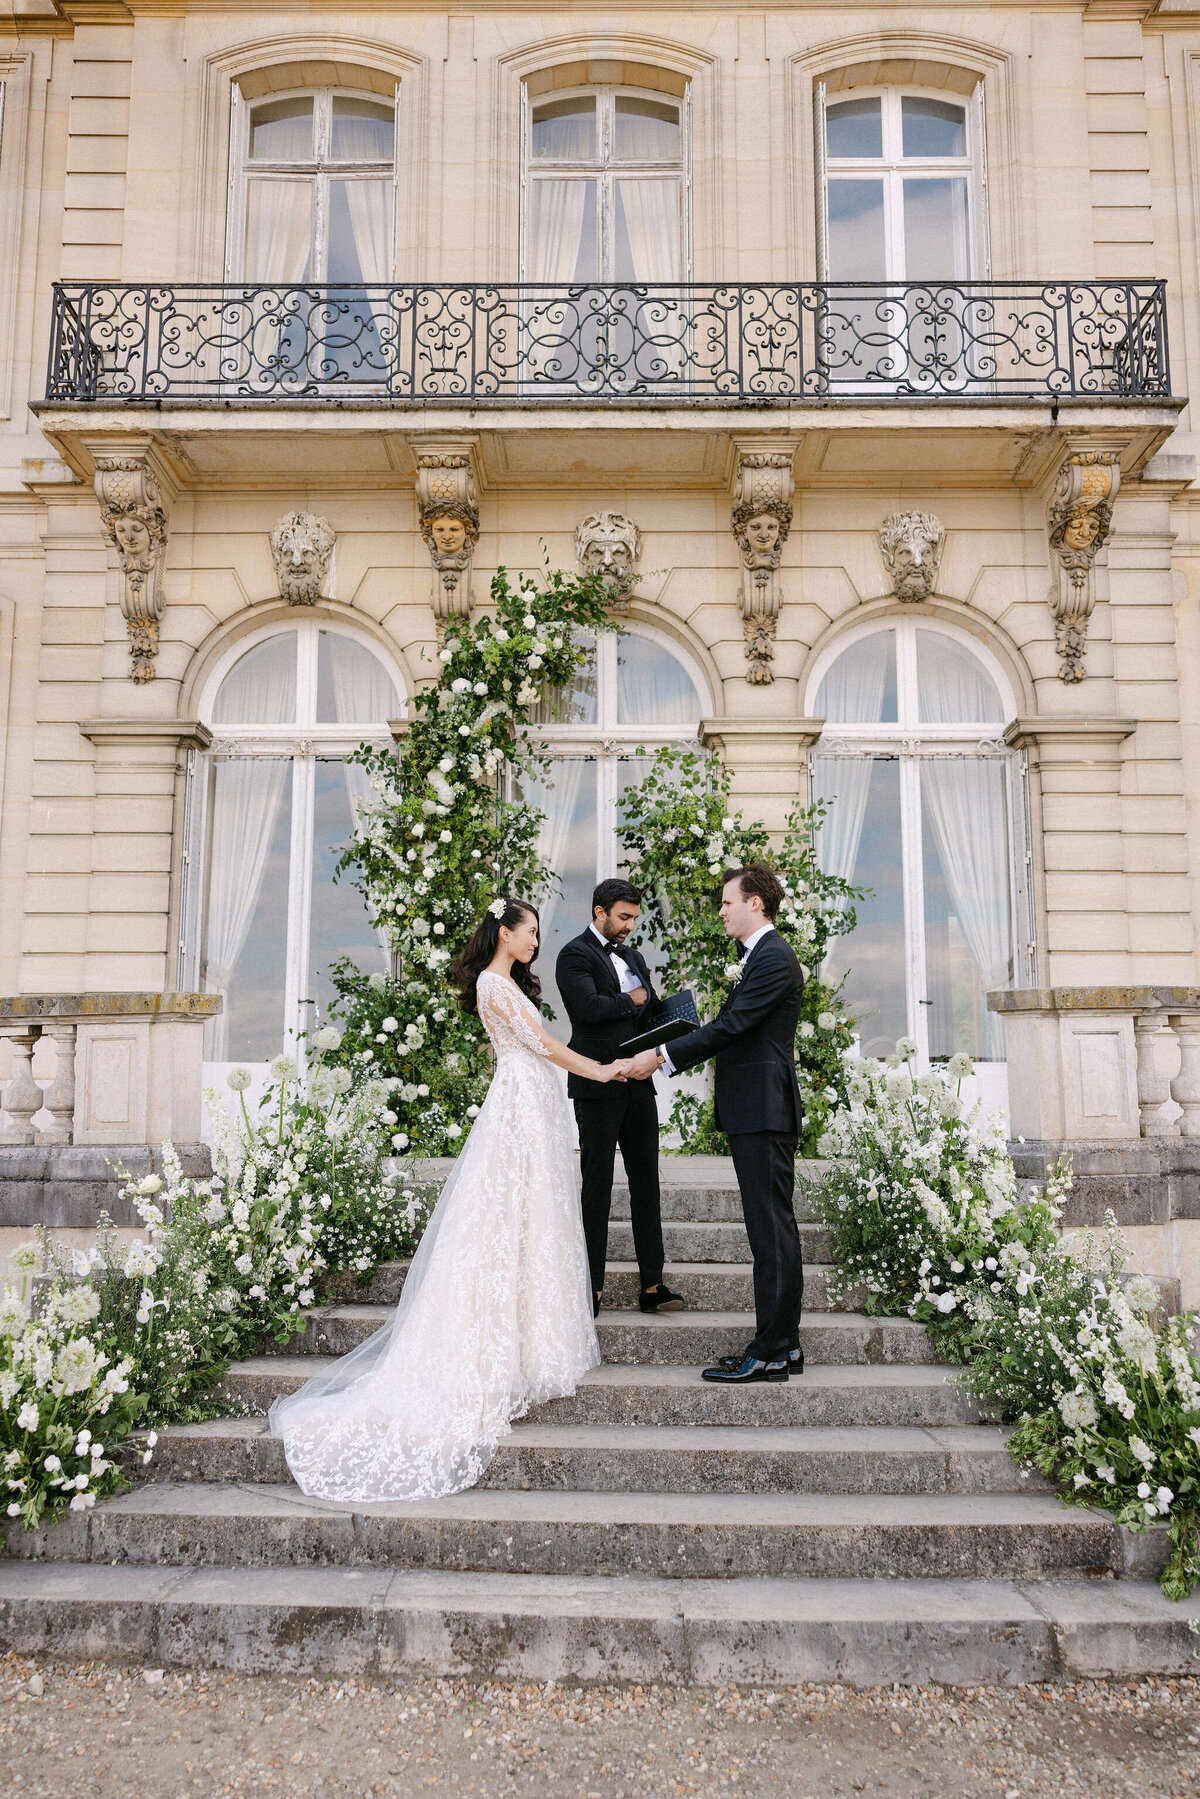 Jennifer Fox Weddings English speaking wedding planning & design agency in France crafting refined and bespoke weddings and celebrations Provence, Paris and destination 338